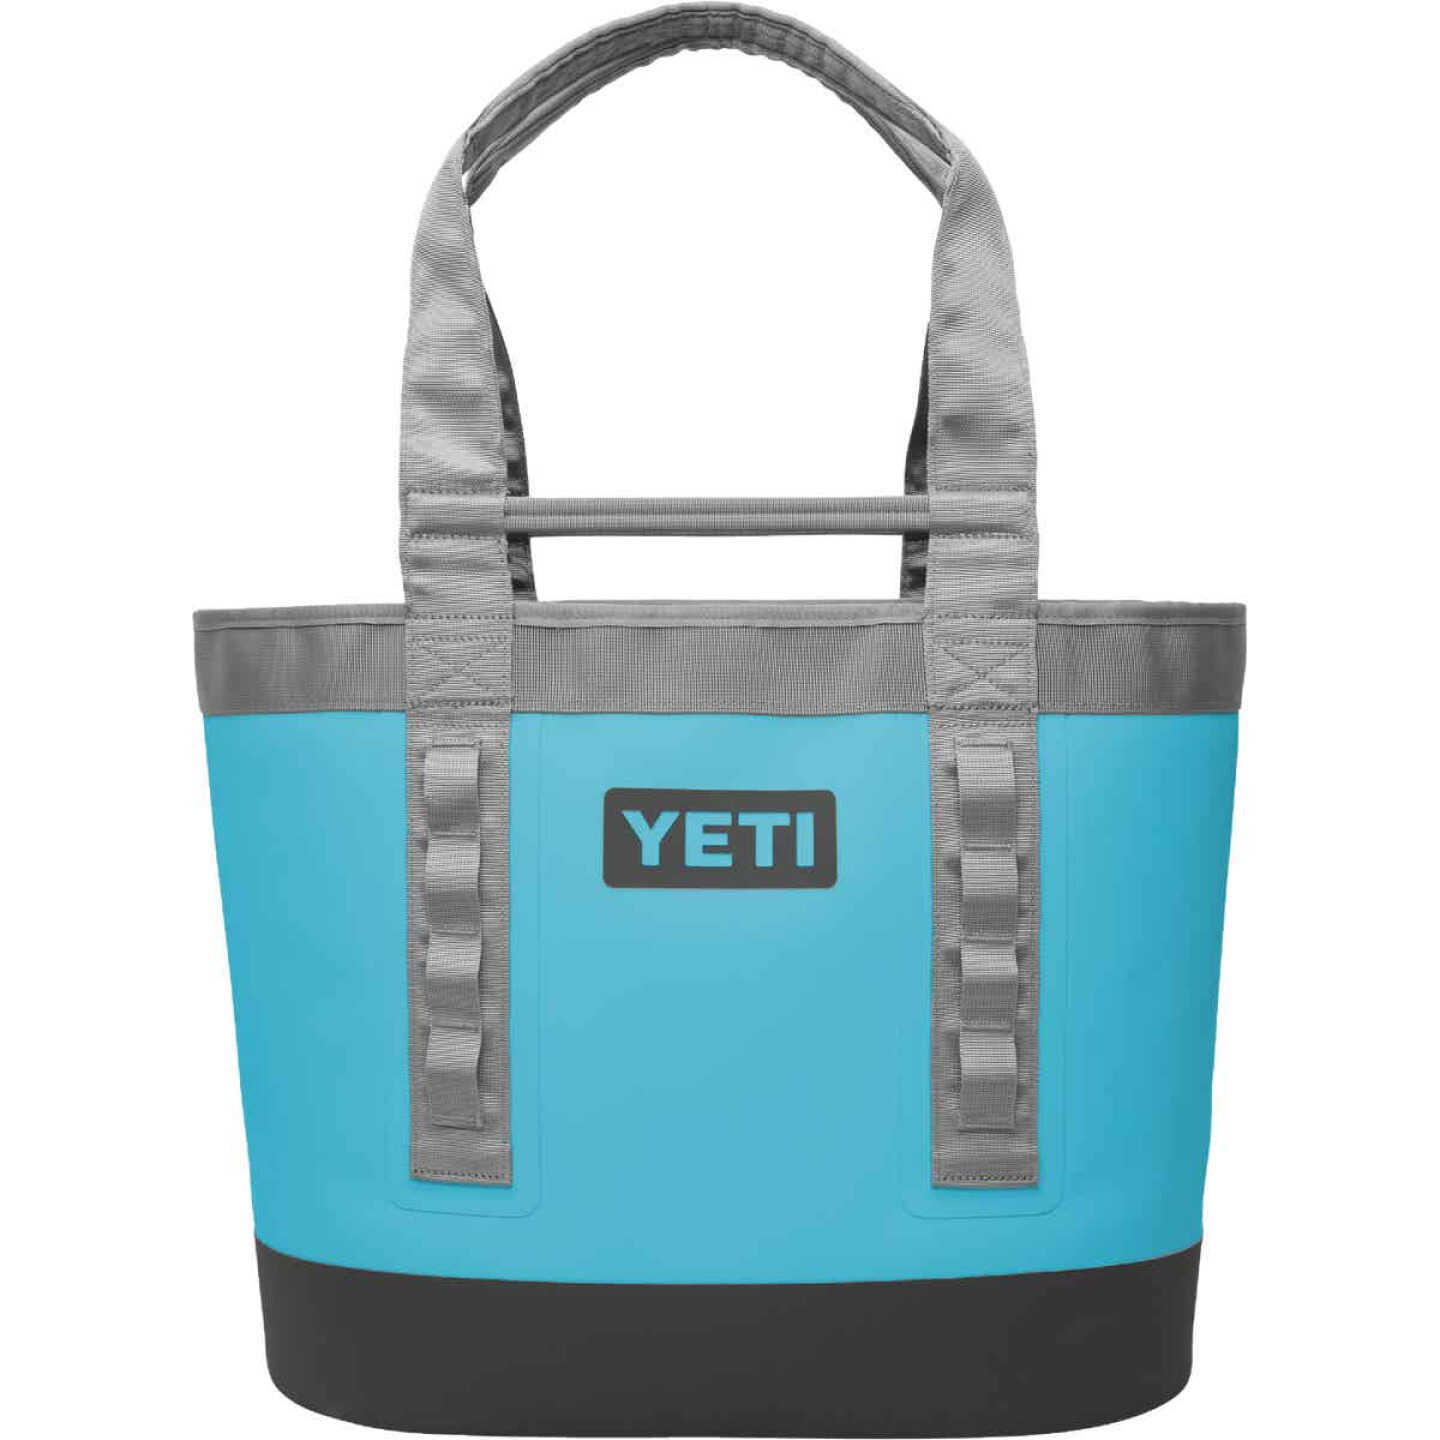  YETI Camino Carryall 35, All-Purpose Utility, Boat and Beach Tote  Bag, Durable, Waterproof, Everglade Sand : Sports & Outdoors